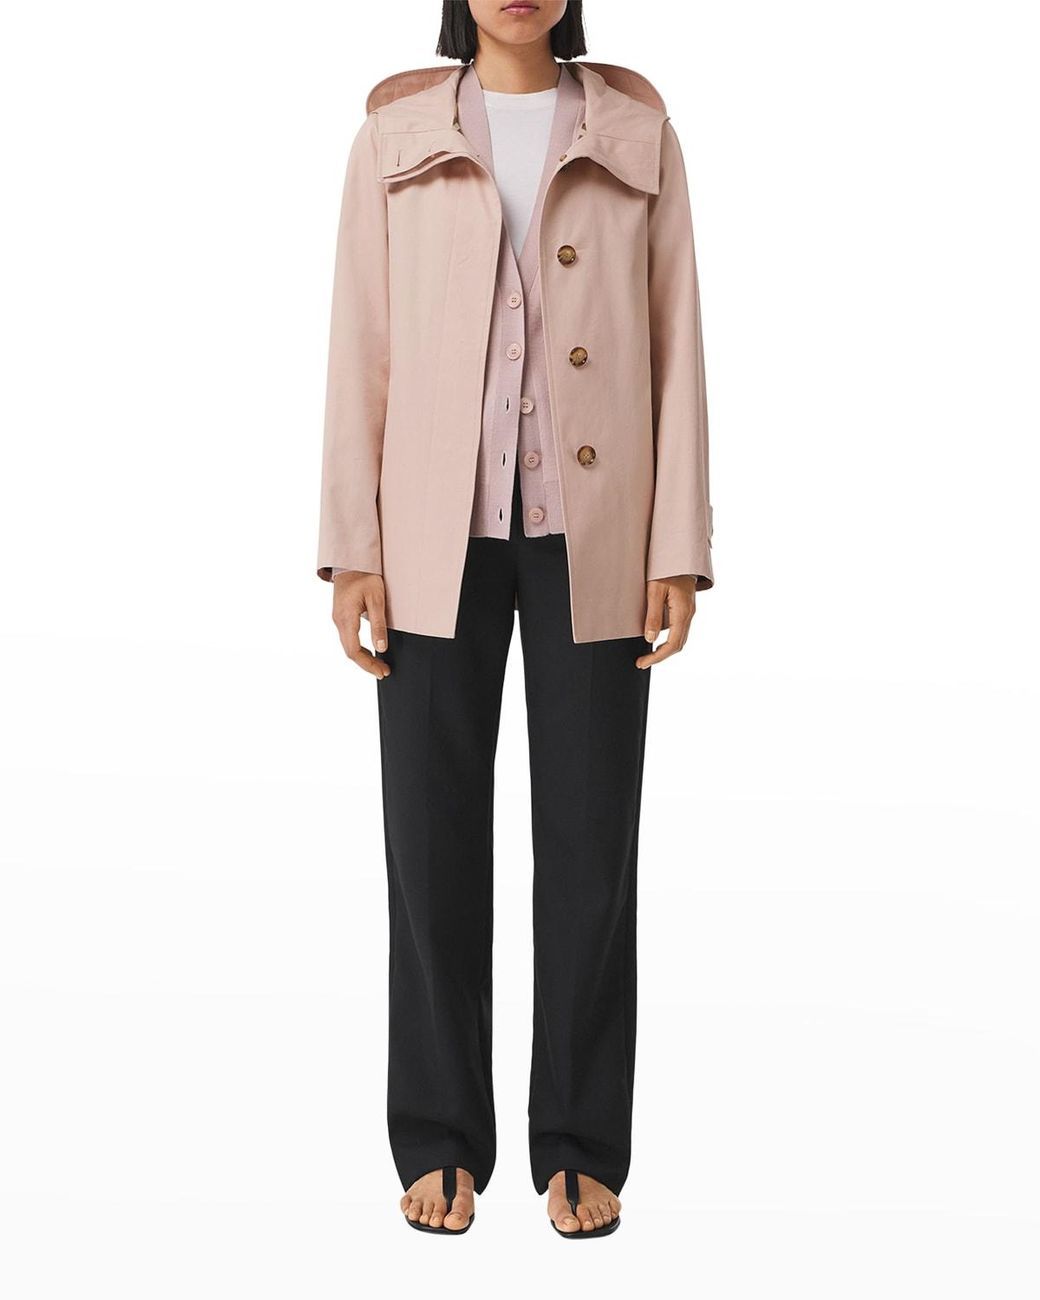 Burberry Ryme Belted Raincoat in Pink | Lyst